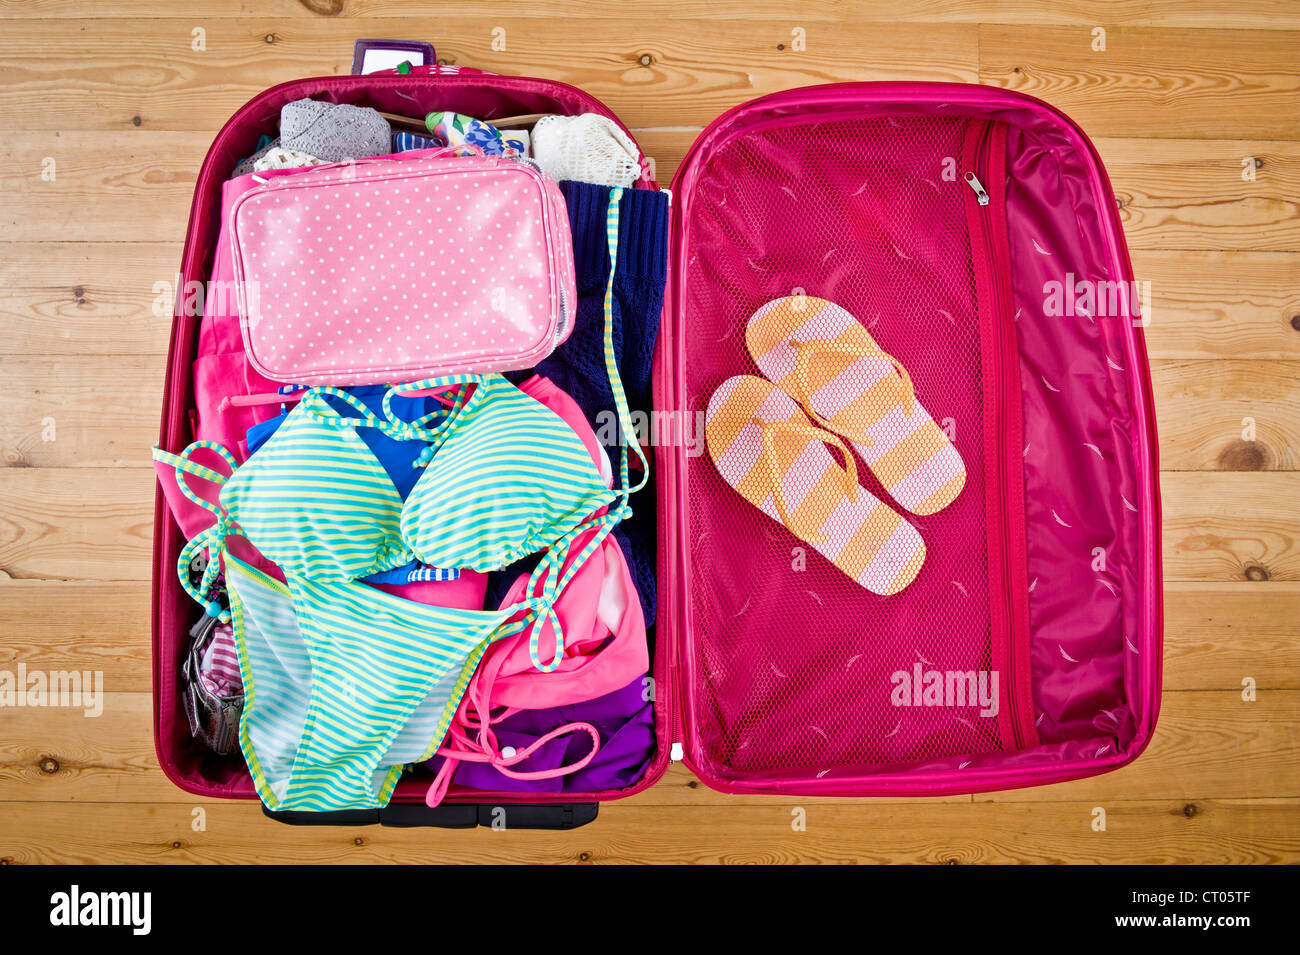 Pink Suitcase High Resolution Stock Photography and Images - Alamy